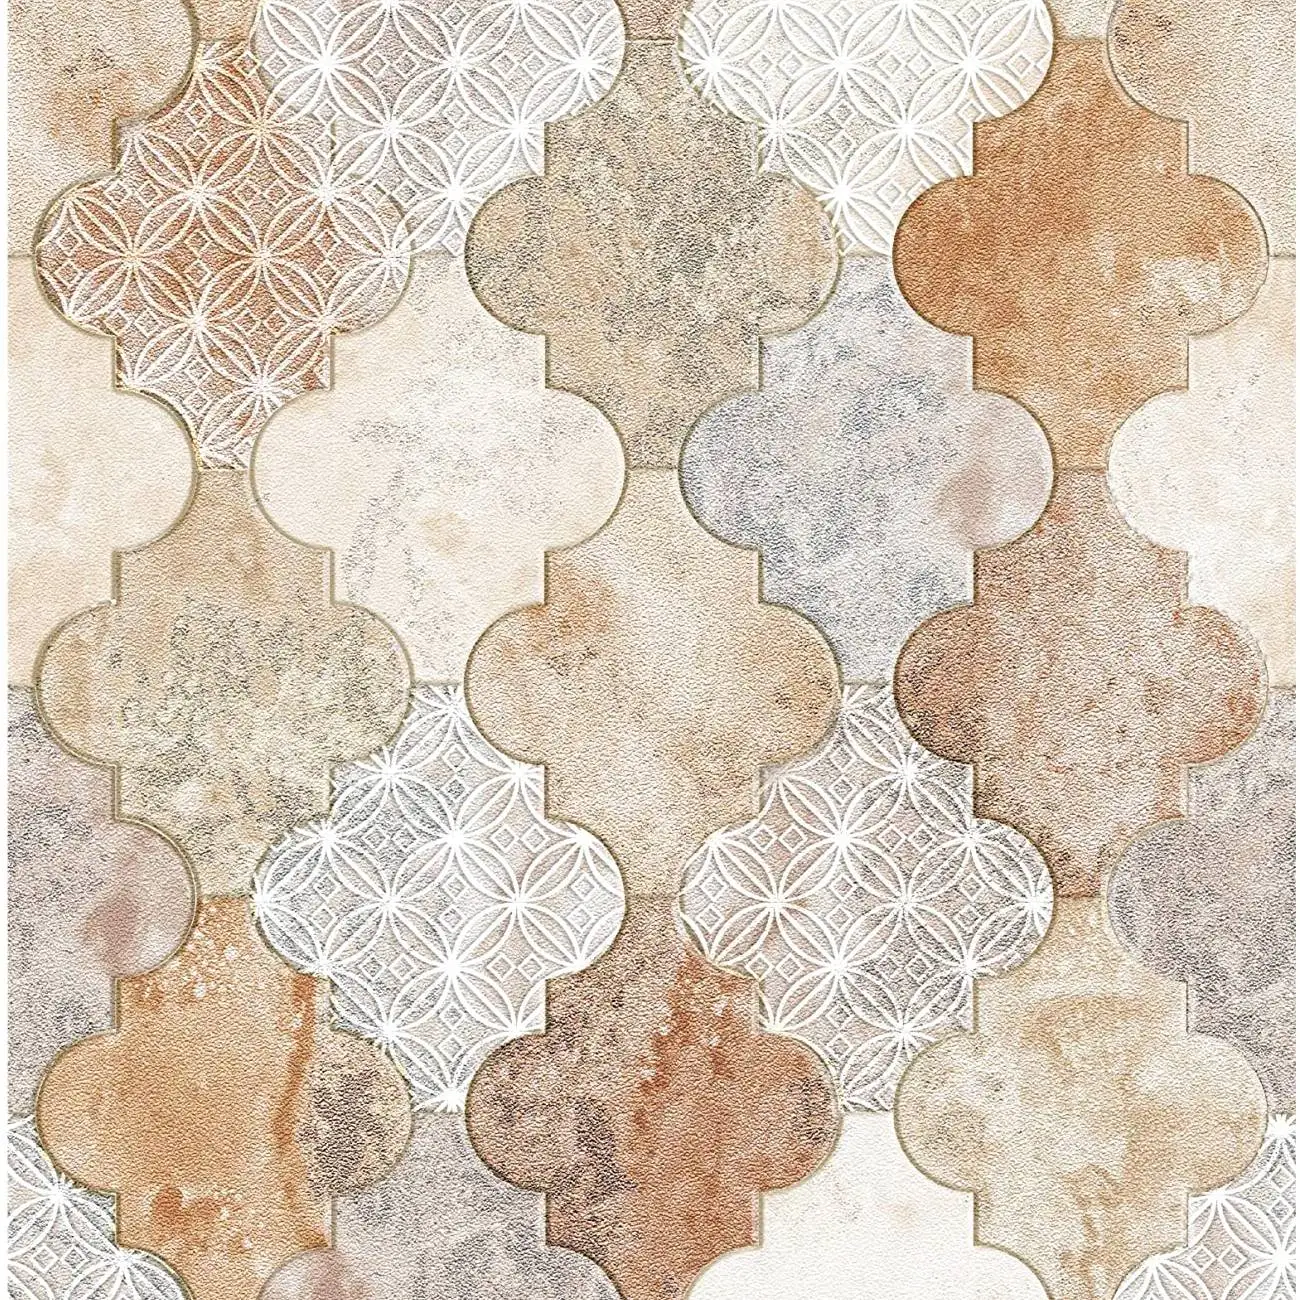 Peel and Stick Wallpaper Handpainting Trellis Marble Stone Extra Thick Self-Adhesive Prepasted Wallpaper Wall Mural home decor vintage brown brick wallpaper brick self adhesive film brick peel and stick wallpaper faux brick textured wallpaper stone paper